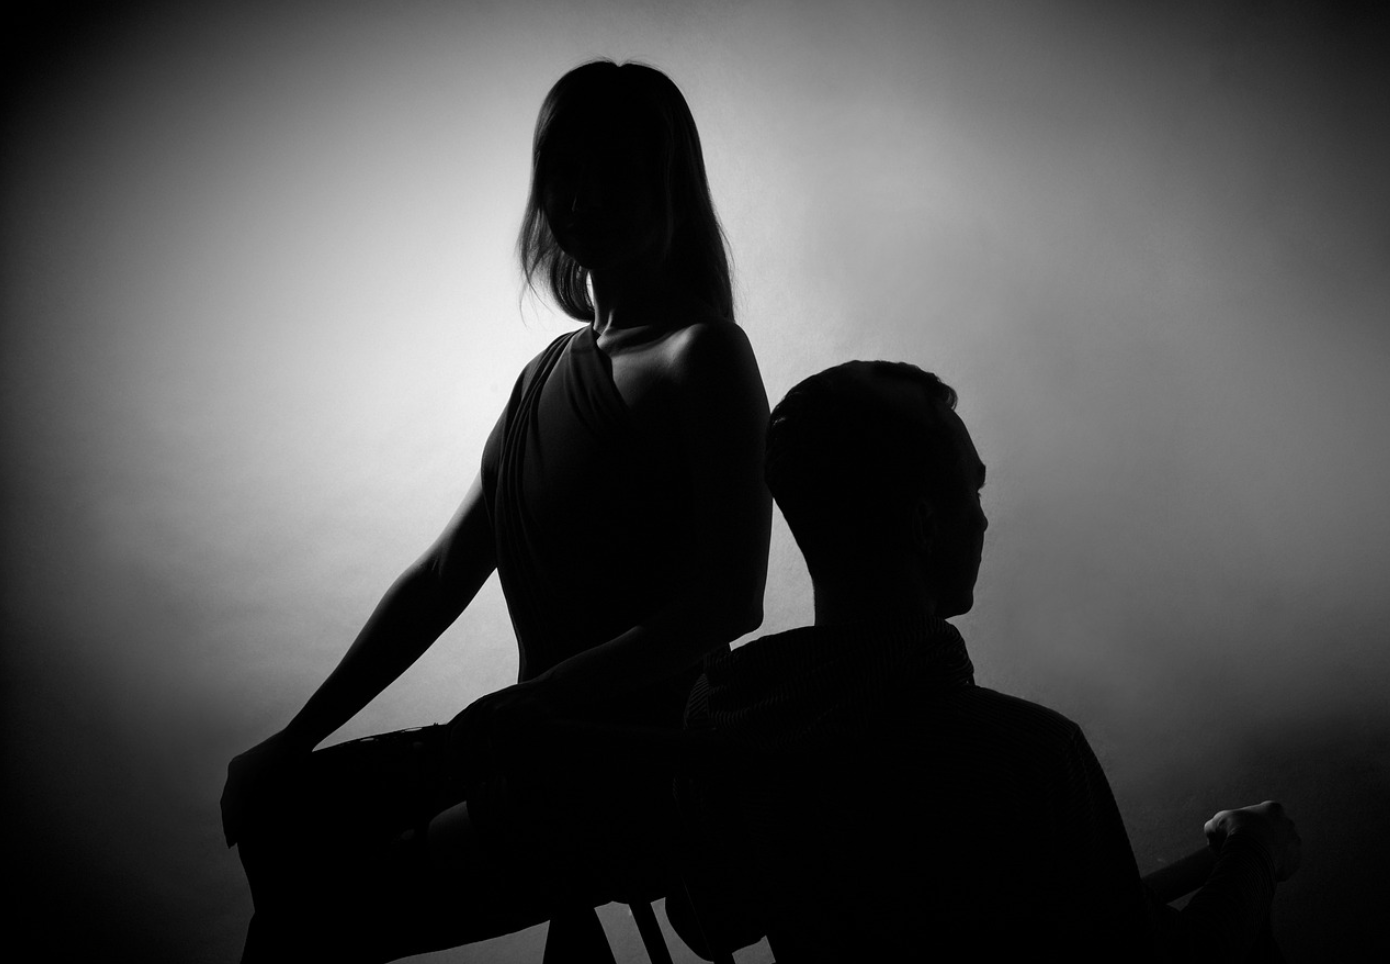 Silhouettes of a man and woman resenting each other; image by R-region, via Pixabay.com.